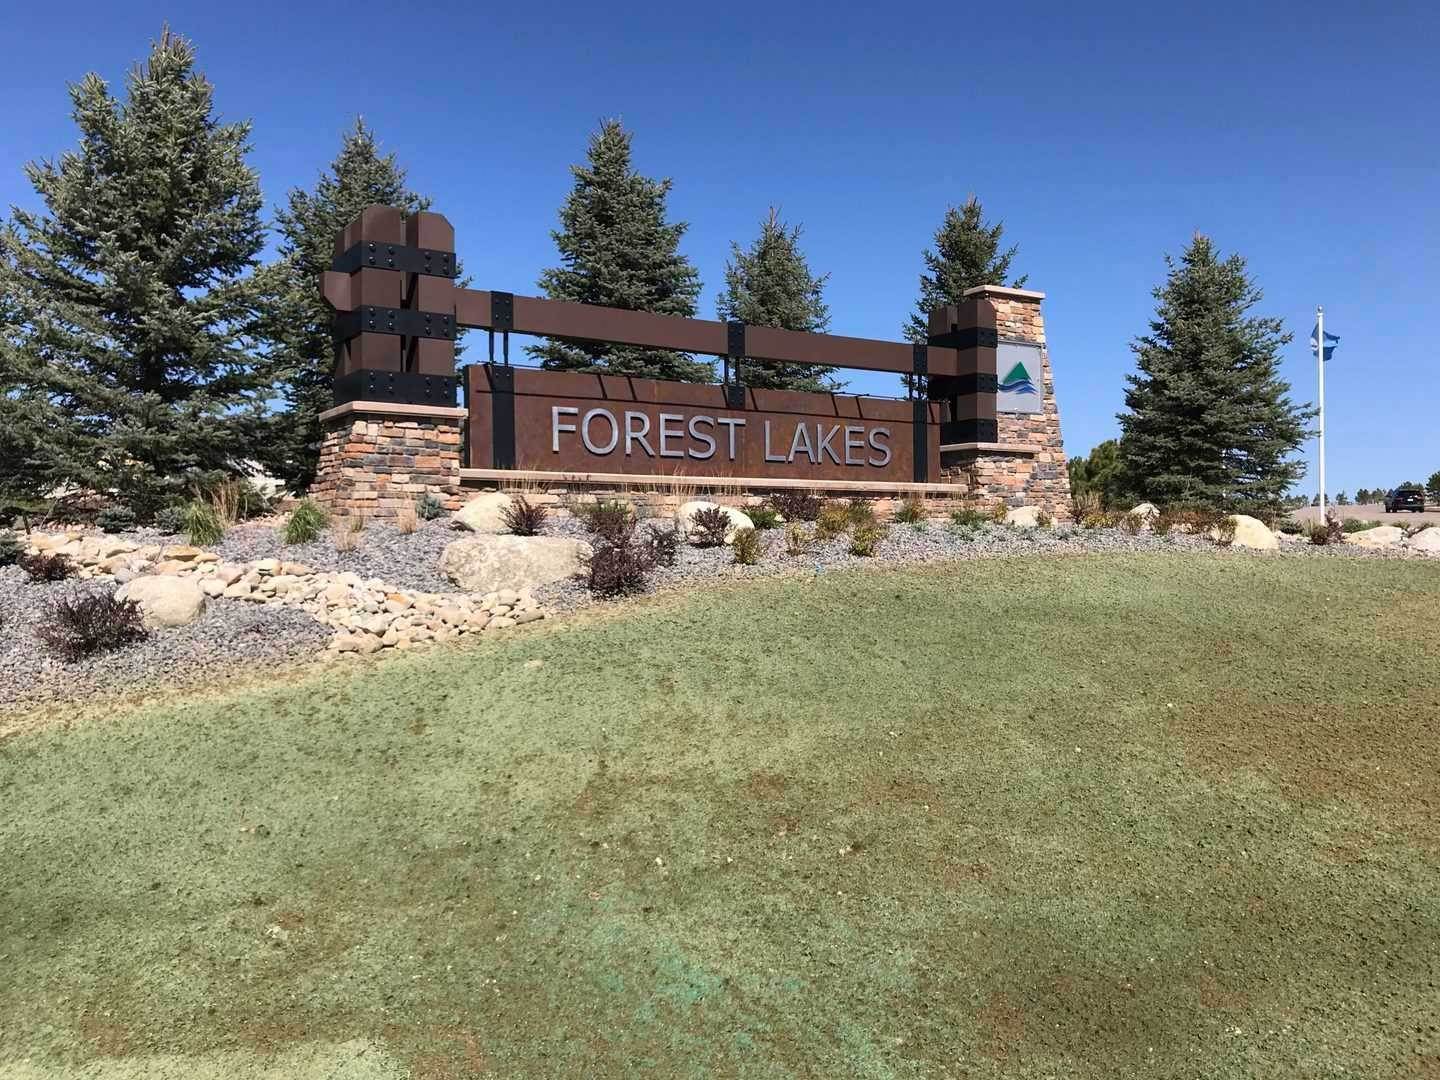 14. Forest Lakes building at 15725 Timber Trek Way, Monument, CO 80132